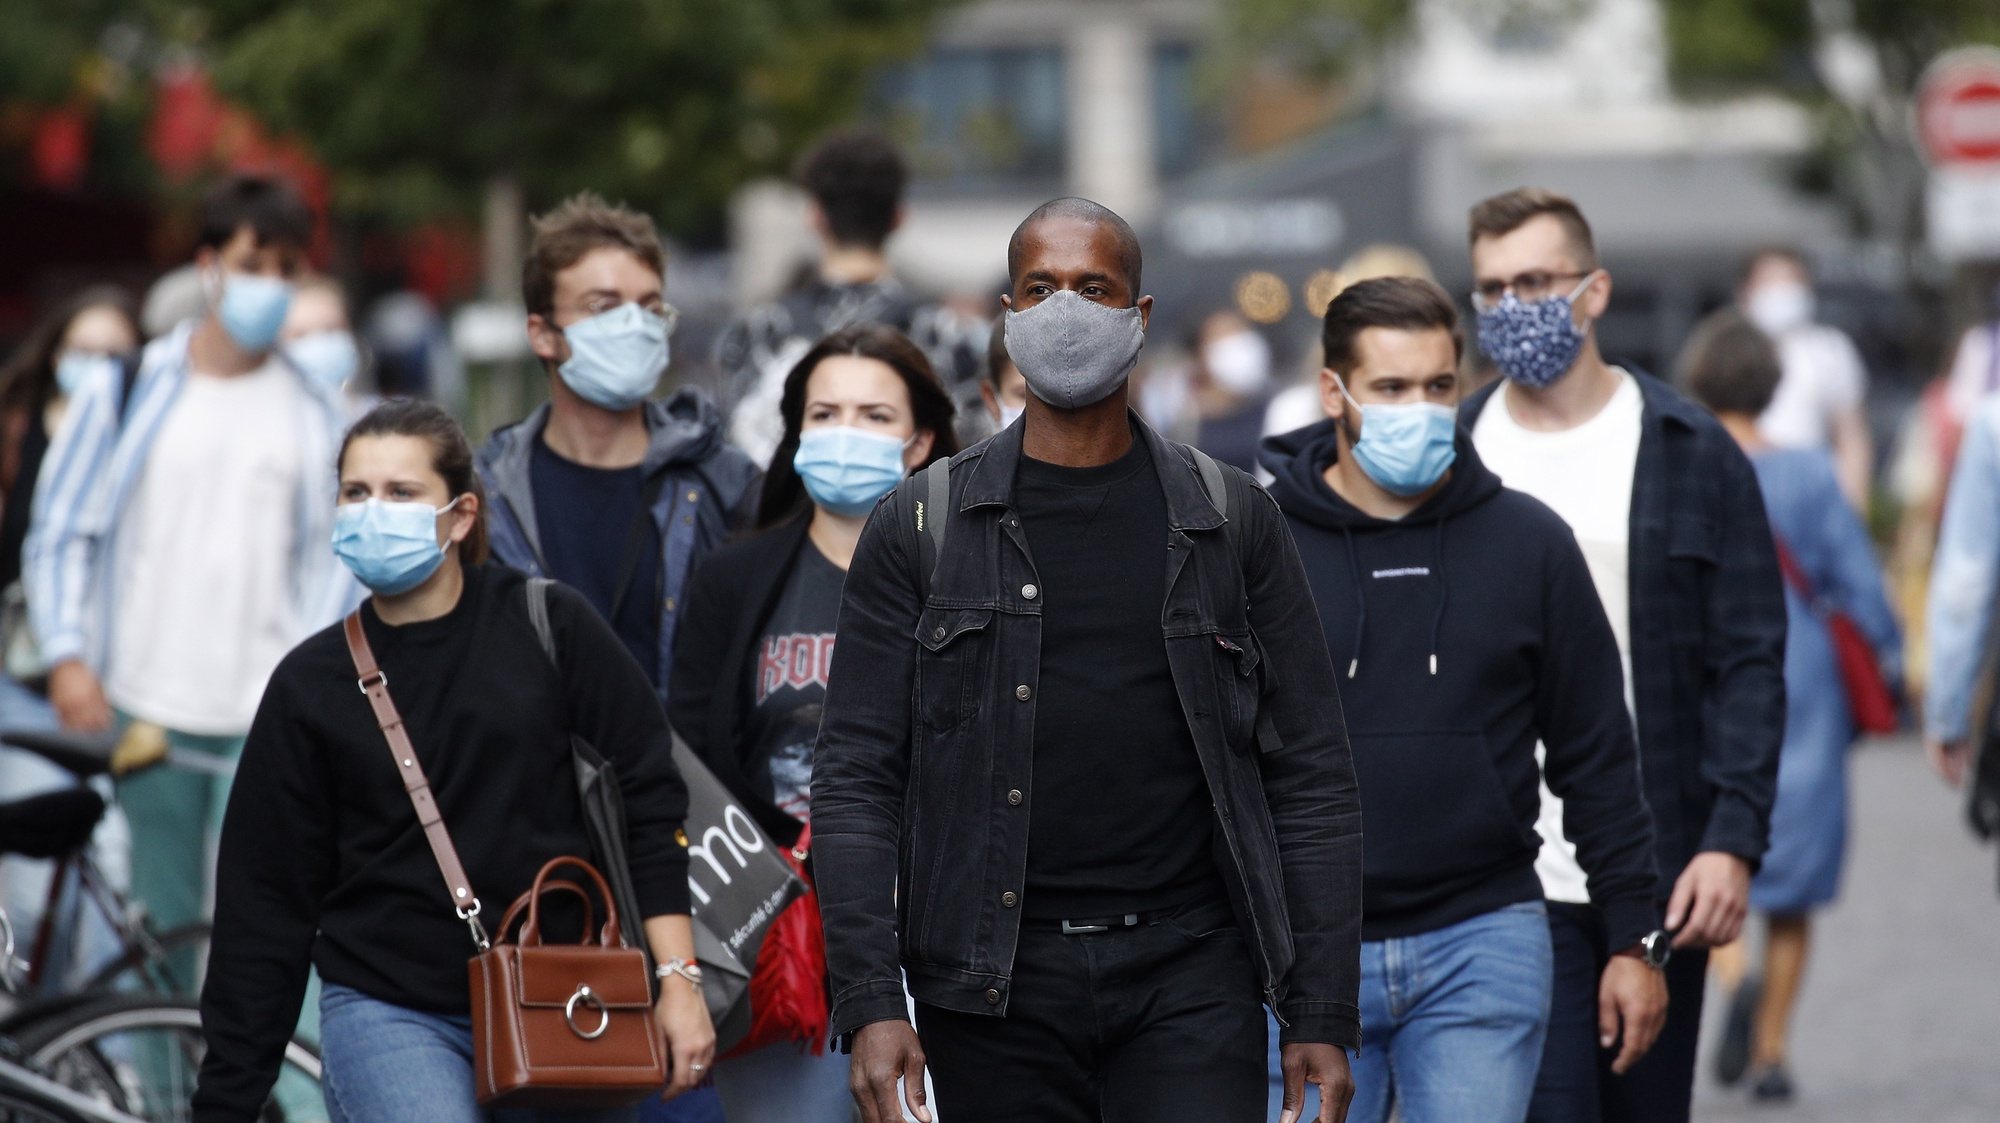 epa08632225 People wearing protective face masks walk in the streets in Paris, France, 28 August 2020. As of 8am on 28 August, protective face masks are mandatory across the city of Paris, a measure annouced by French Prime Minister Jean Castex on 27 August to fight the rising spread of coronavirus SARS-CoV-2 which causes the Covid-19 disease. Cases in France have surged in recent weeks, with over 6000 new cases recorded in a 24 hour period.  EPA/YOAN VALAT